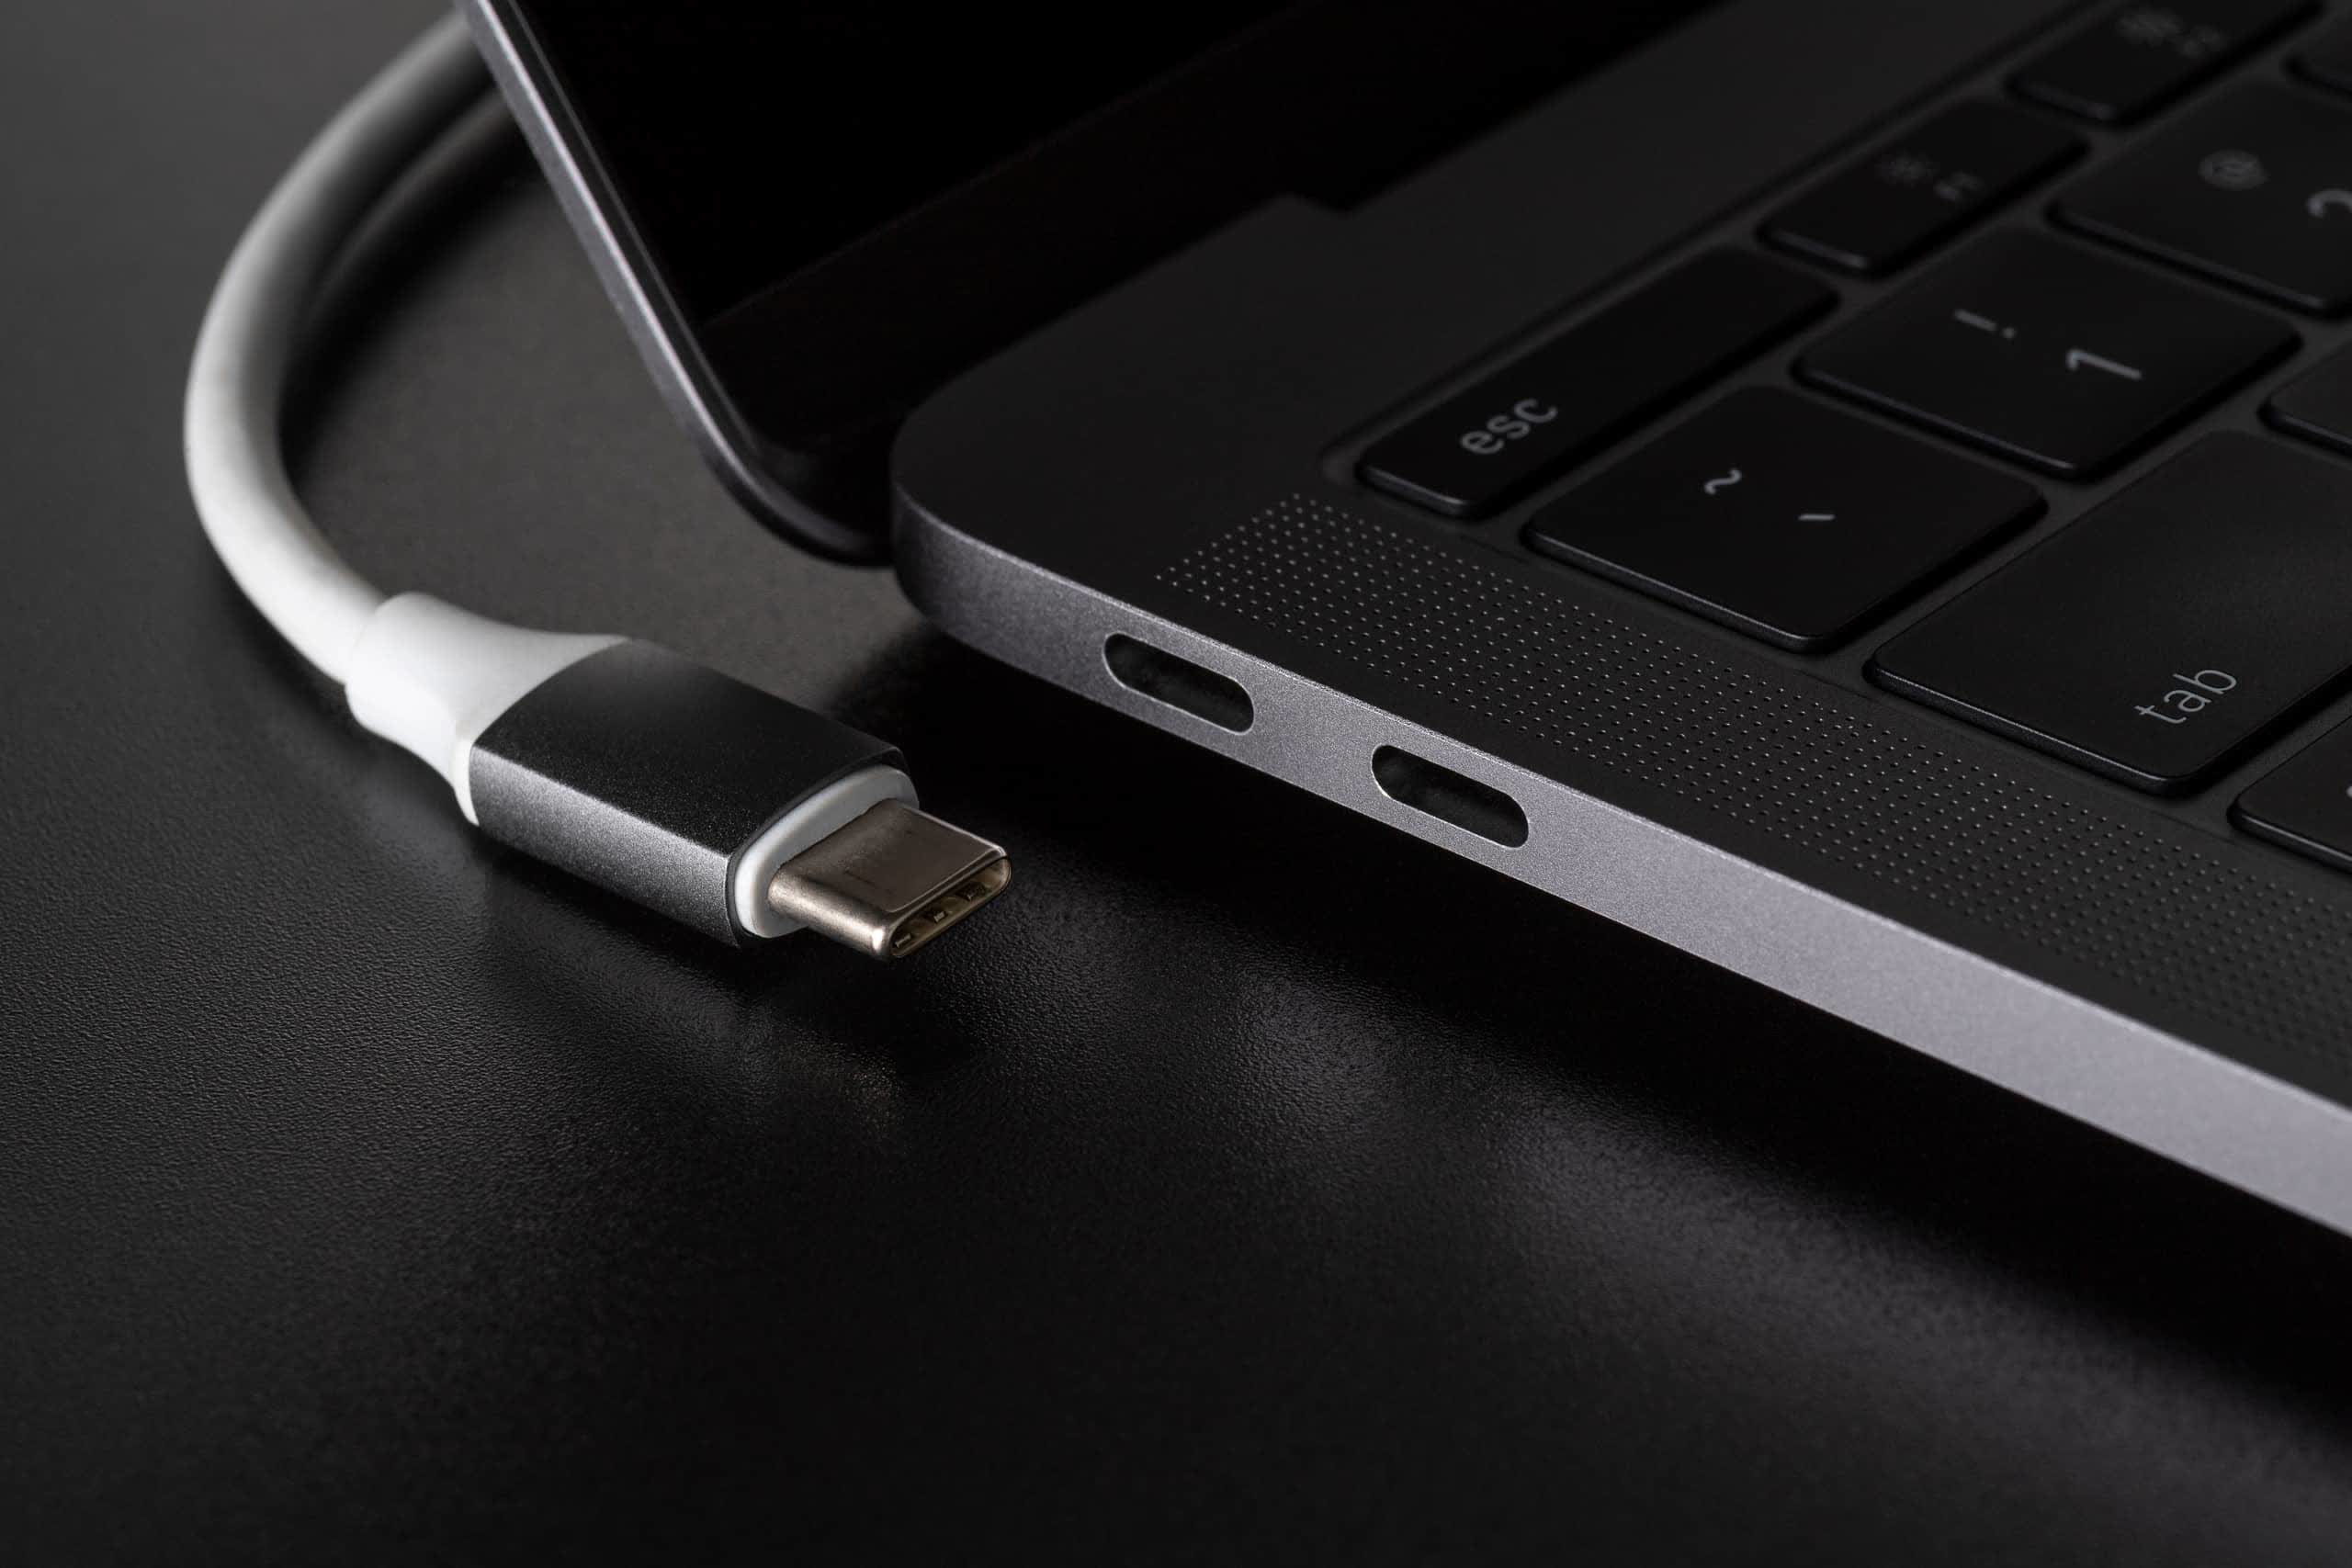 USB Type-C is getting new logos in an attempt to solve cable confusion